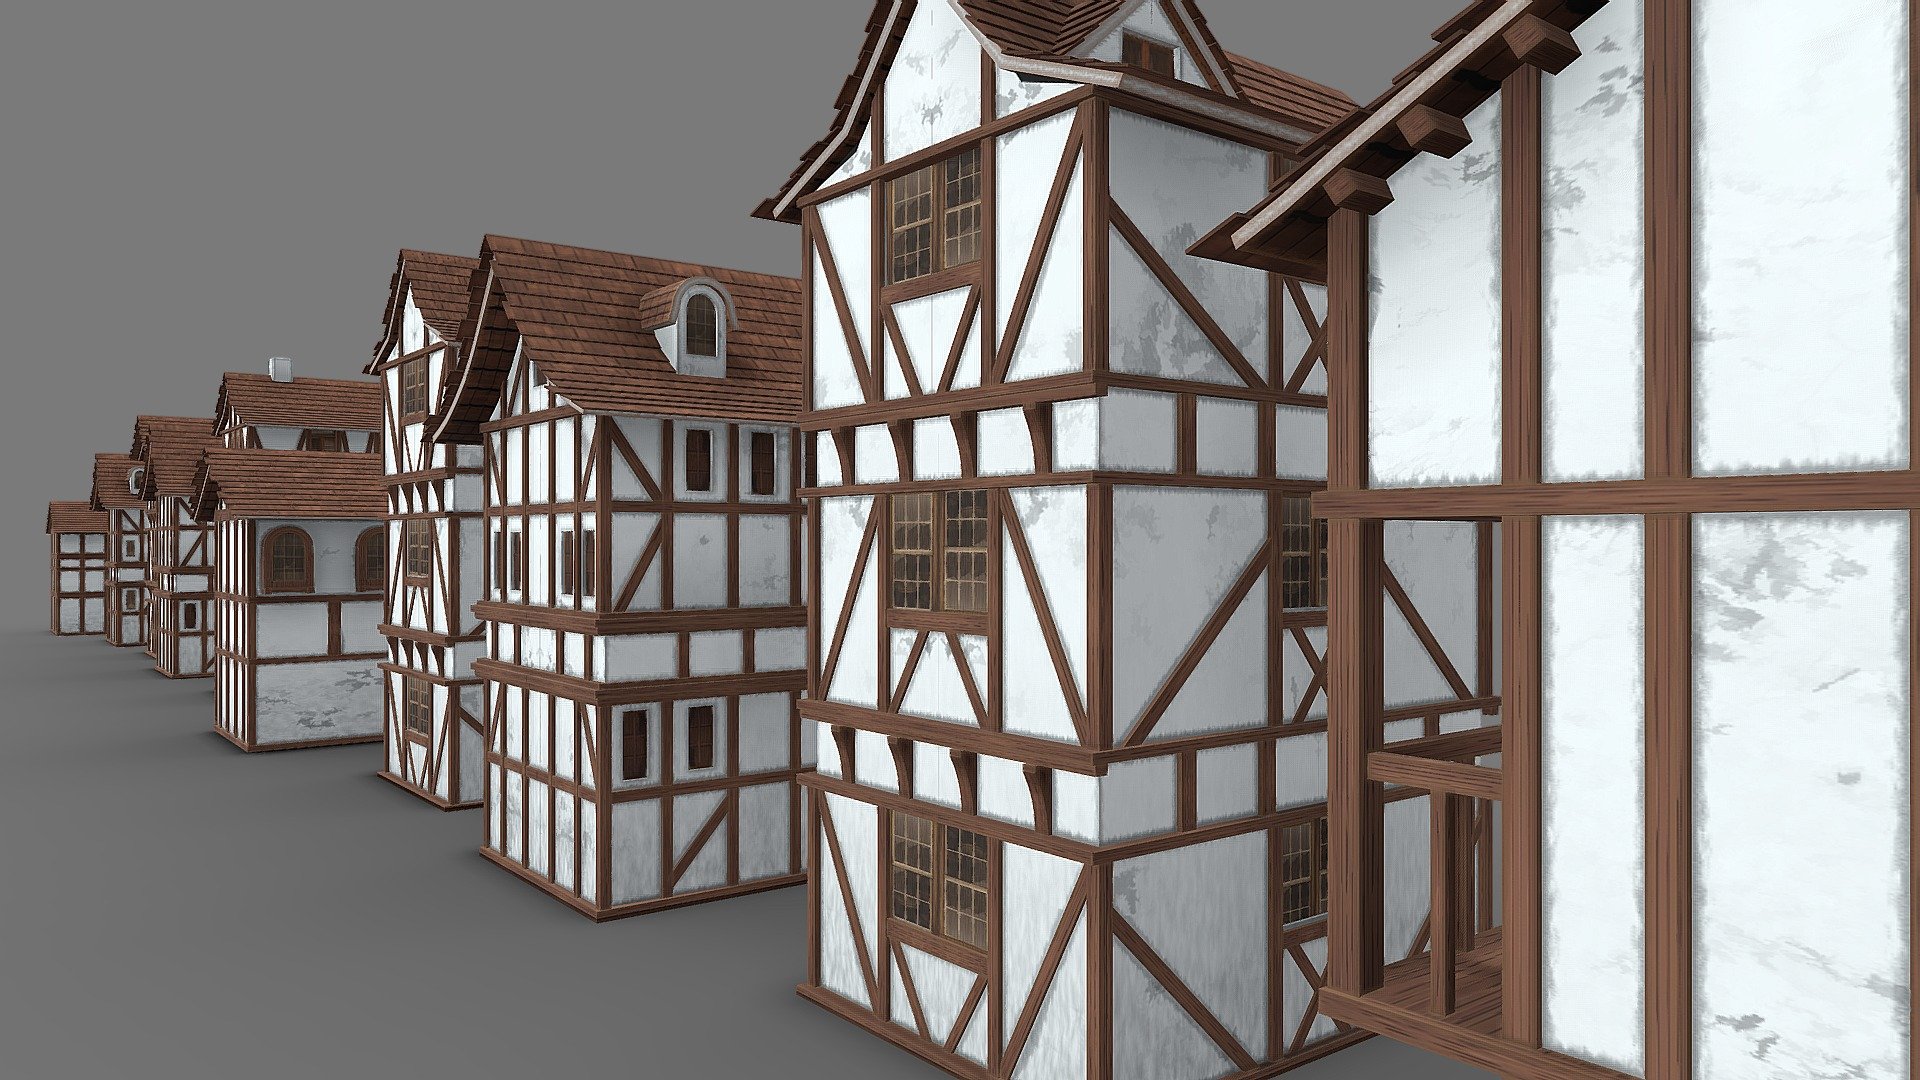 **MEDIEVAL HOUSE

Files**




Blender 3.2

gltf

obj

fbx

3ds max 2018

Texture Color

10 Materials

20 4k Textures .jpeg

Square meshes

VIDEO : https://youtu.be/cI-AEHaURyc - Anime_Medieval_House - Buy Royalty Free 3D model by Hivrtoon 3d model